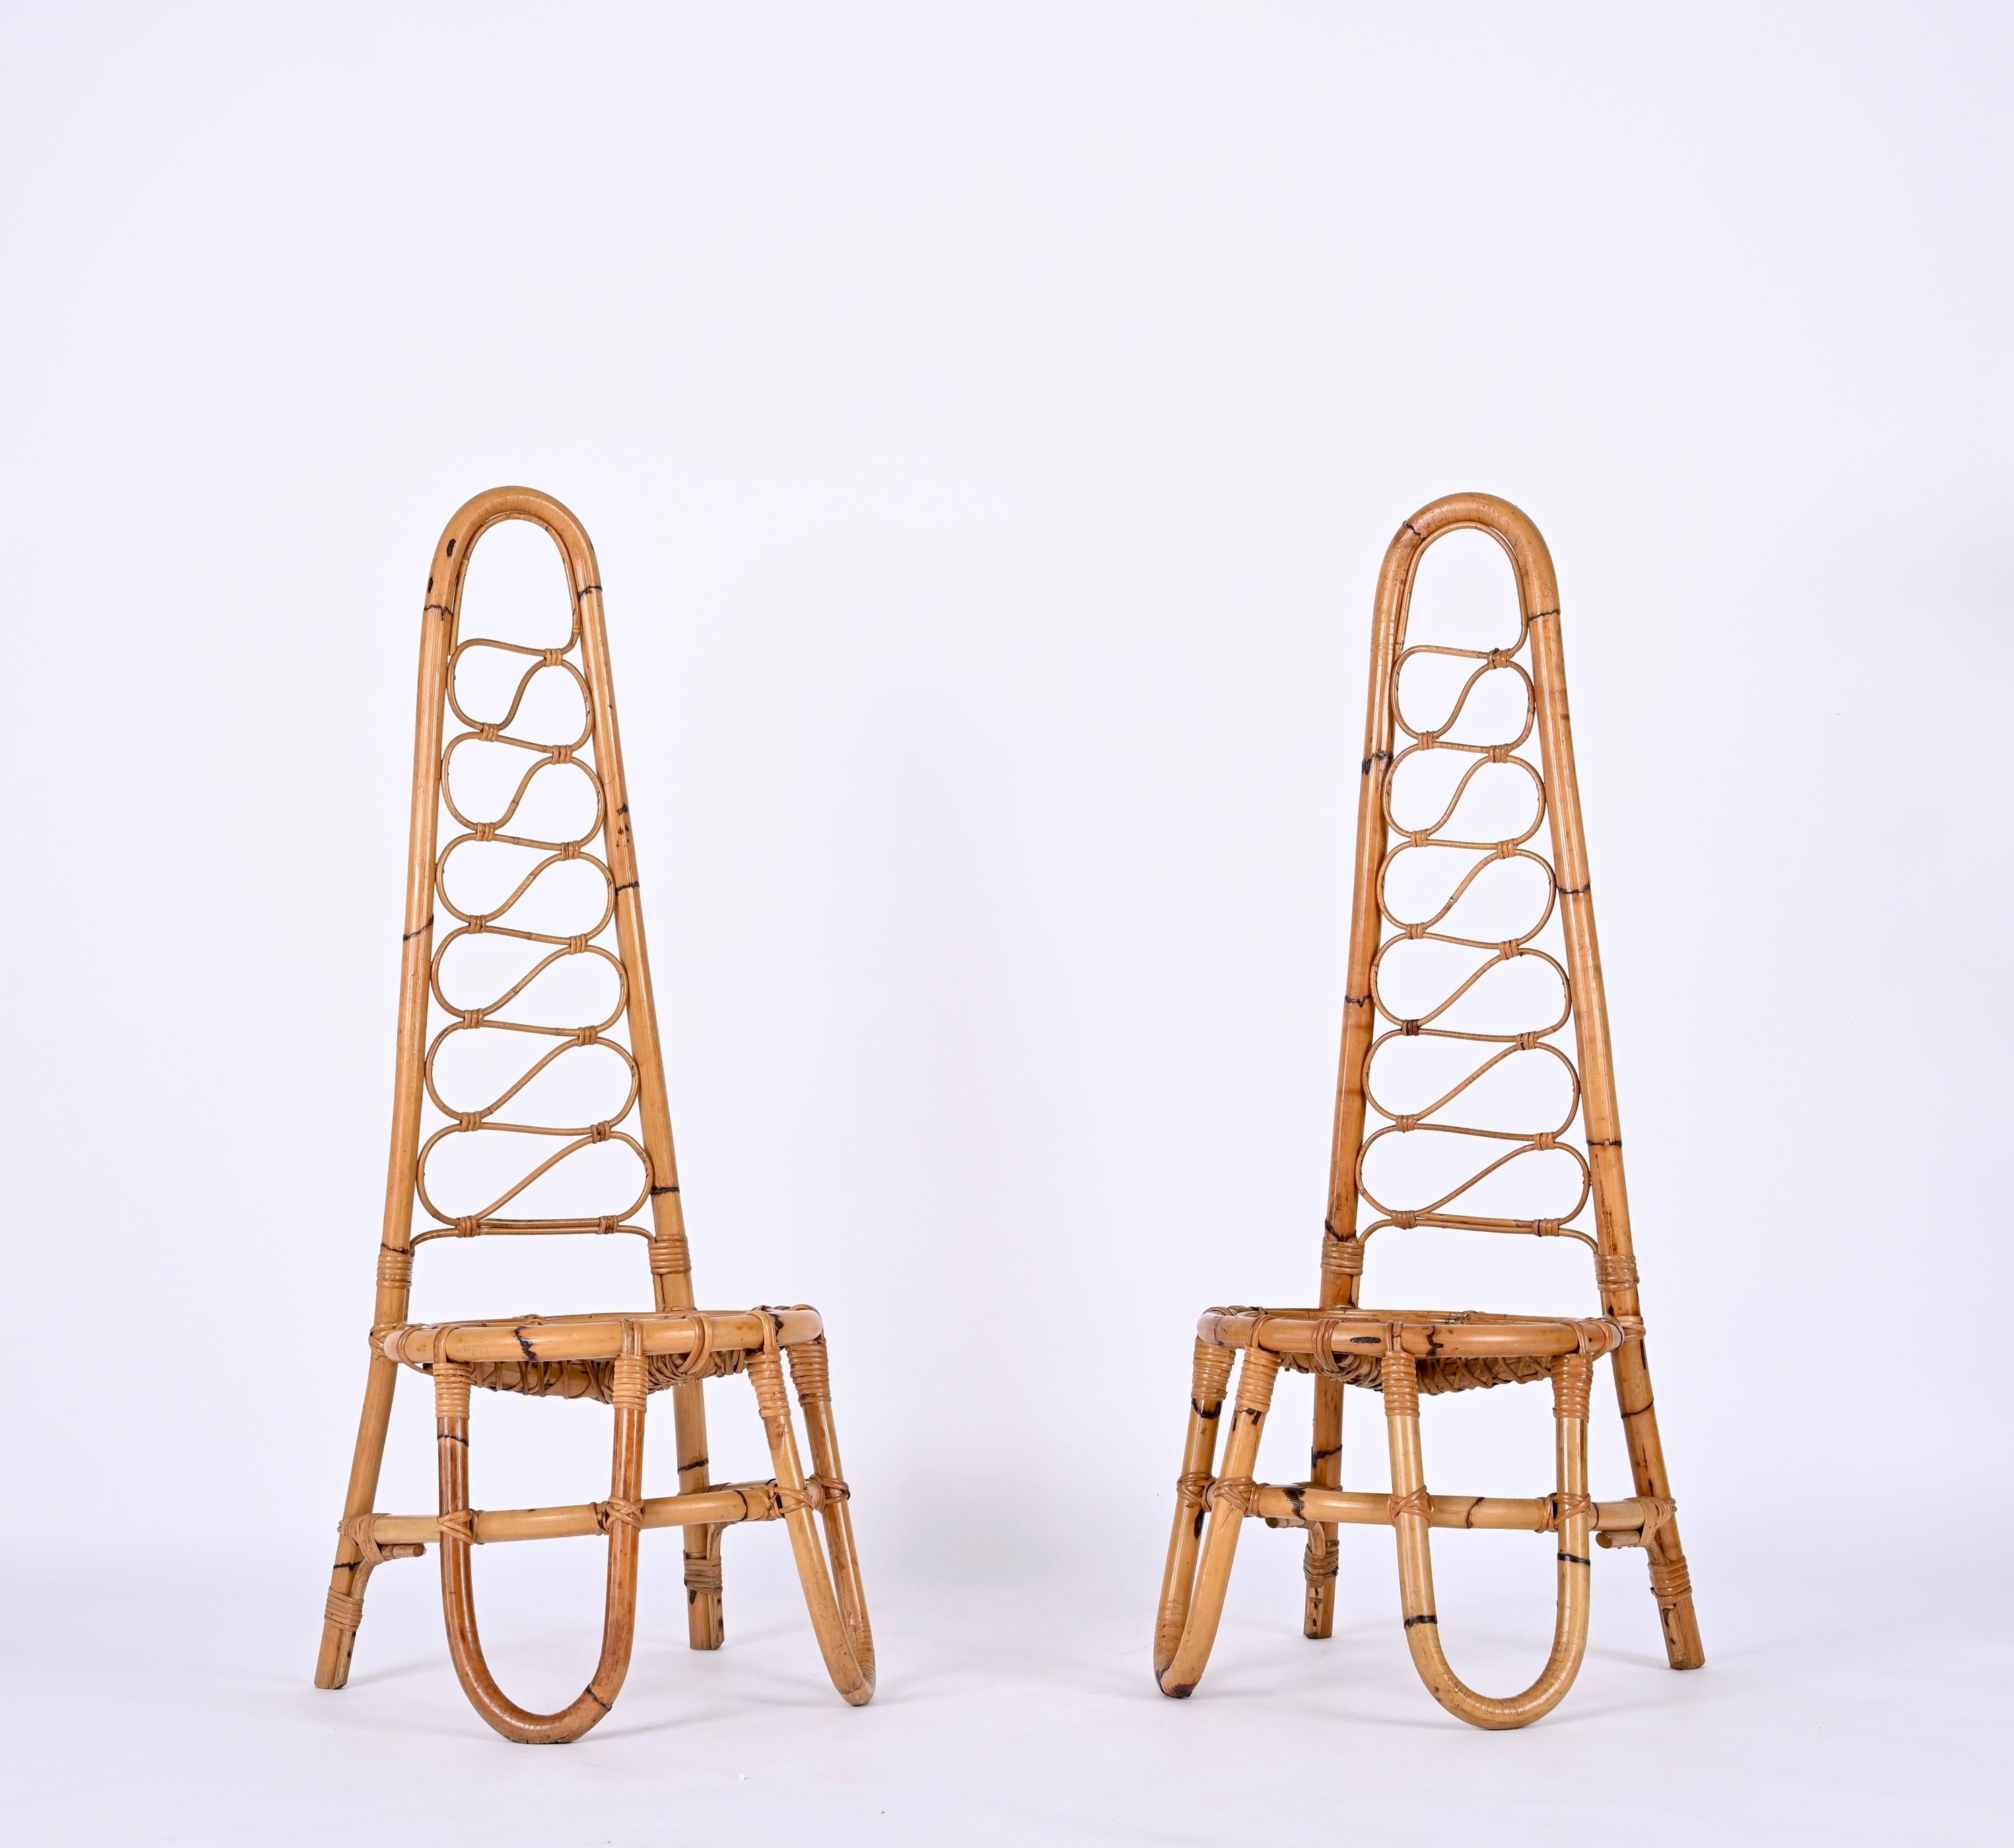 Beautiful pair of high back chairs in bamboo and rattan. These gorgeous chairs were produced in Italy in the 1960s and are attributed to Bonacina.

The chairs feature a sturdy base in curved bamboo with stunning rattan decorations. Fully